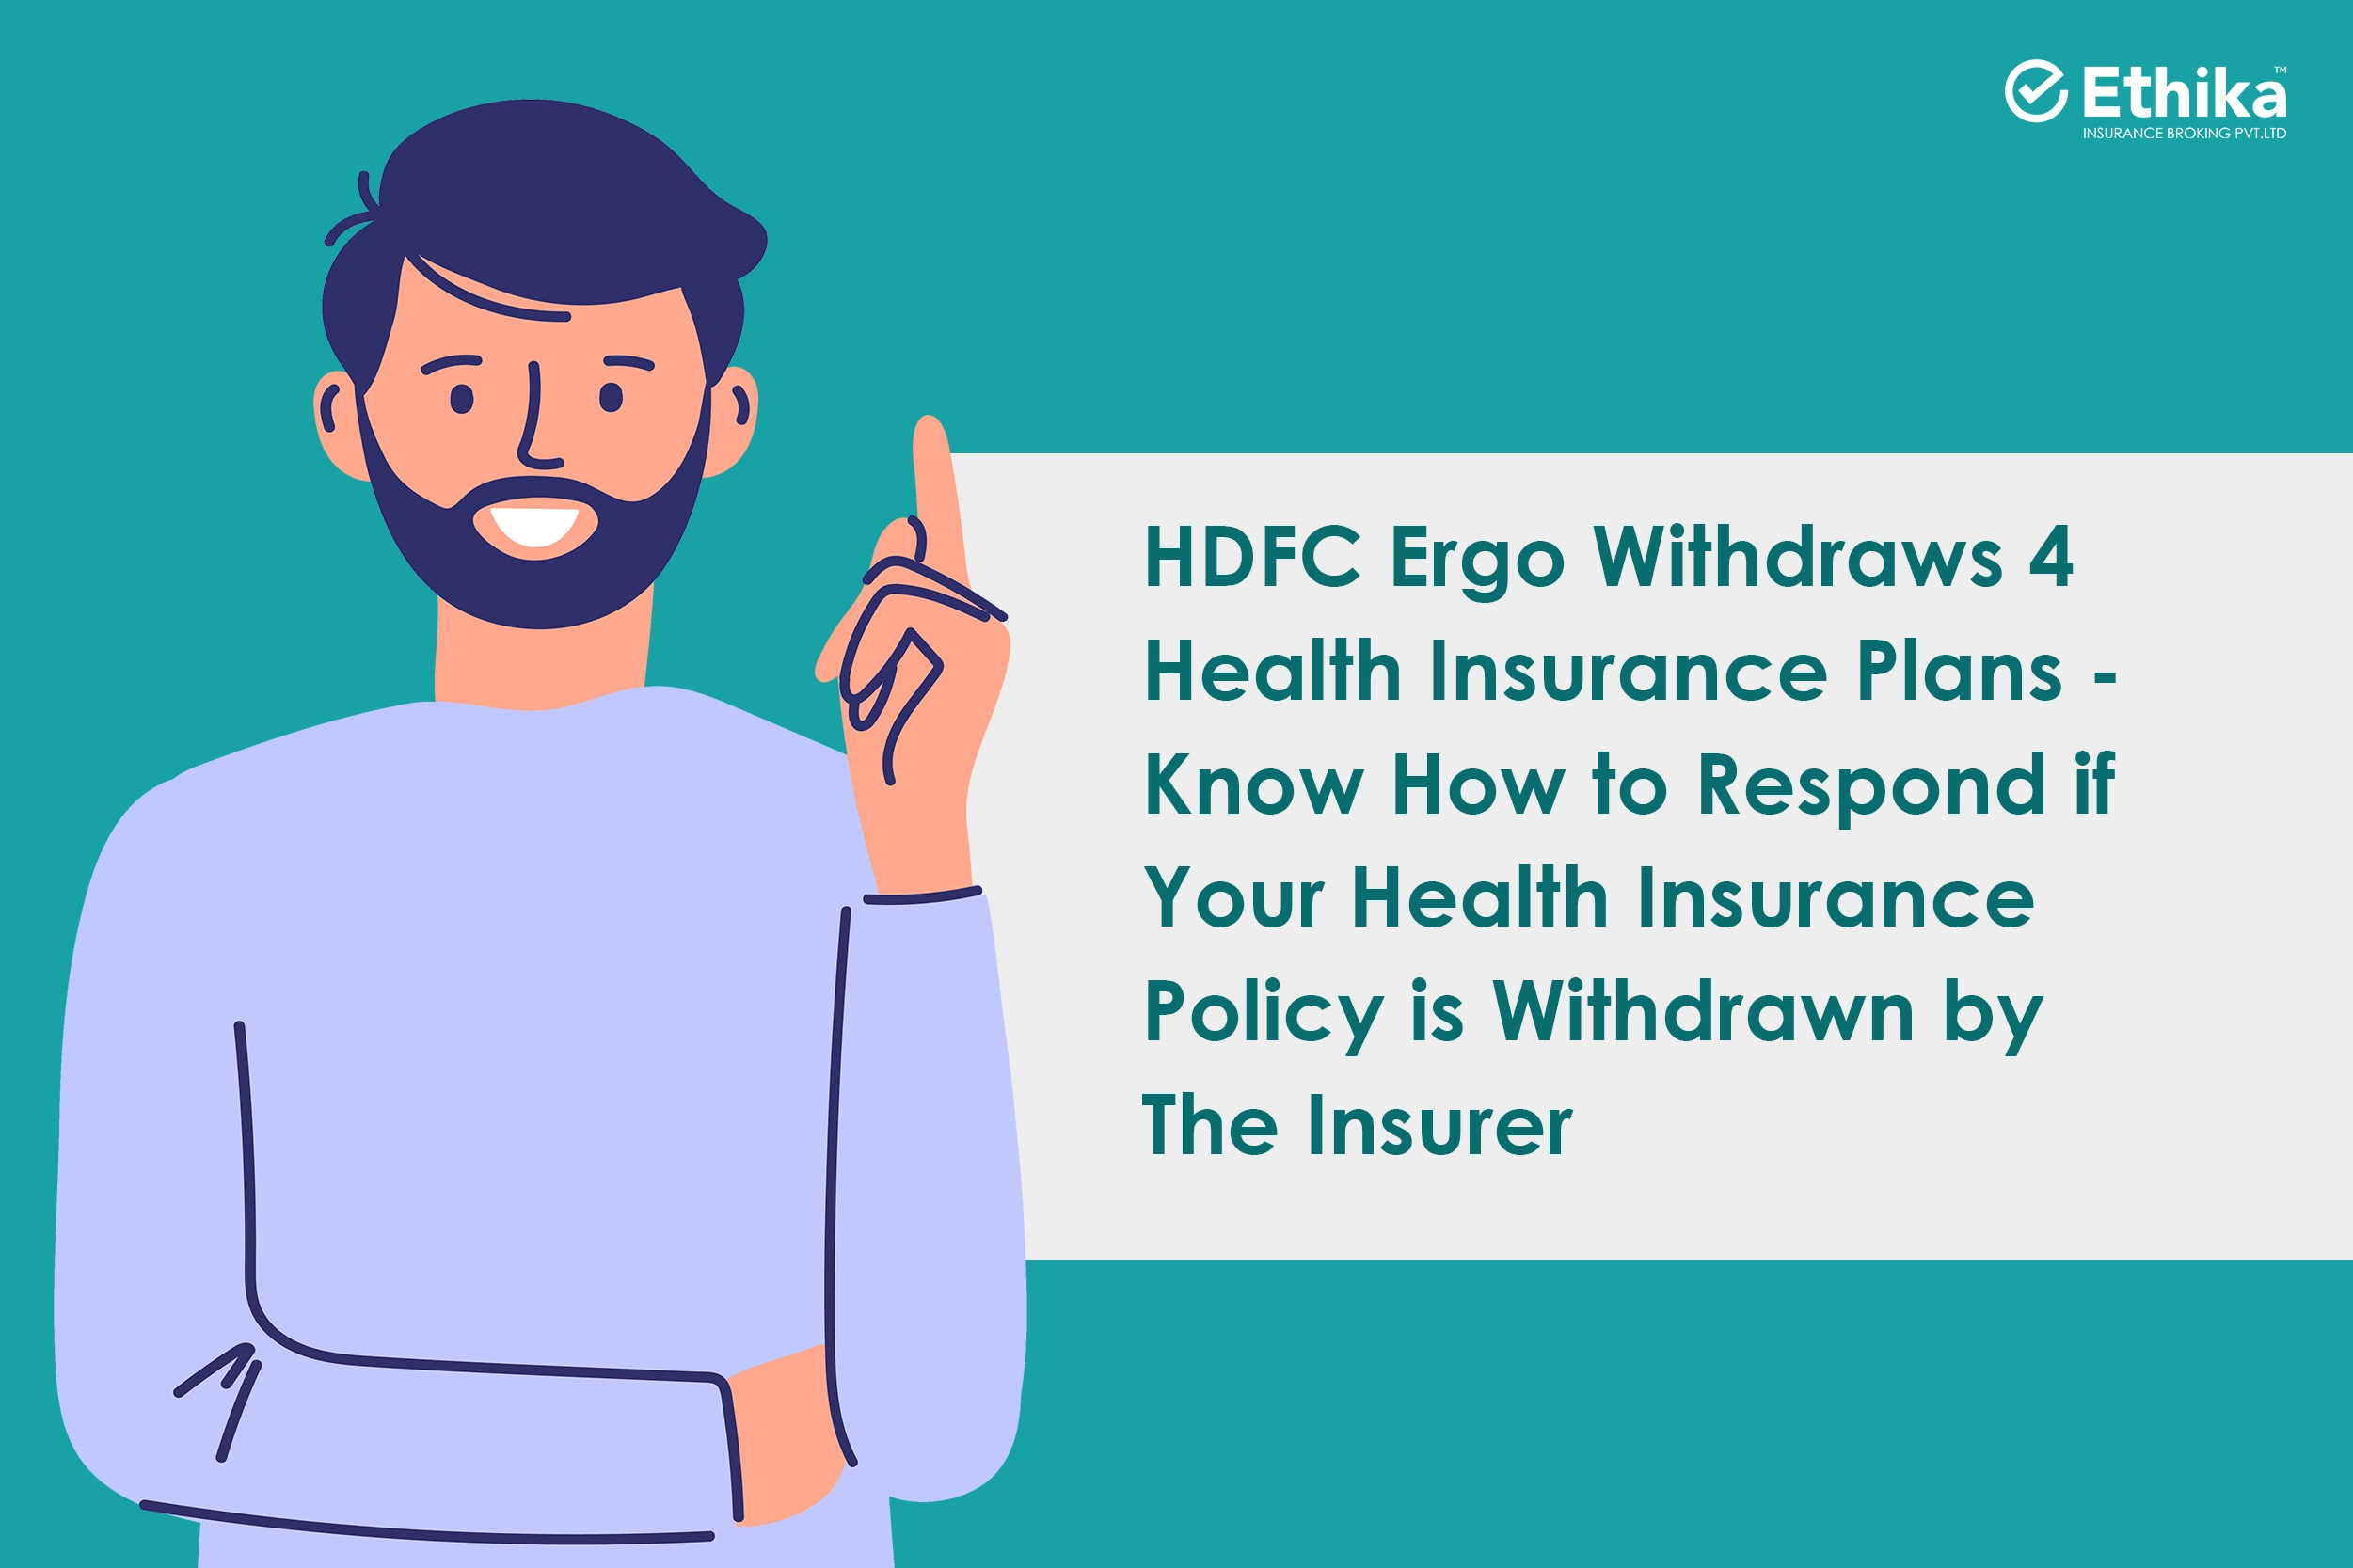 HDFC Ergo Discontinues 4 Health Insurance Plans - Steps to Take if Your Policy is Withdrawn